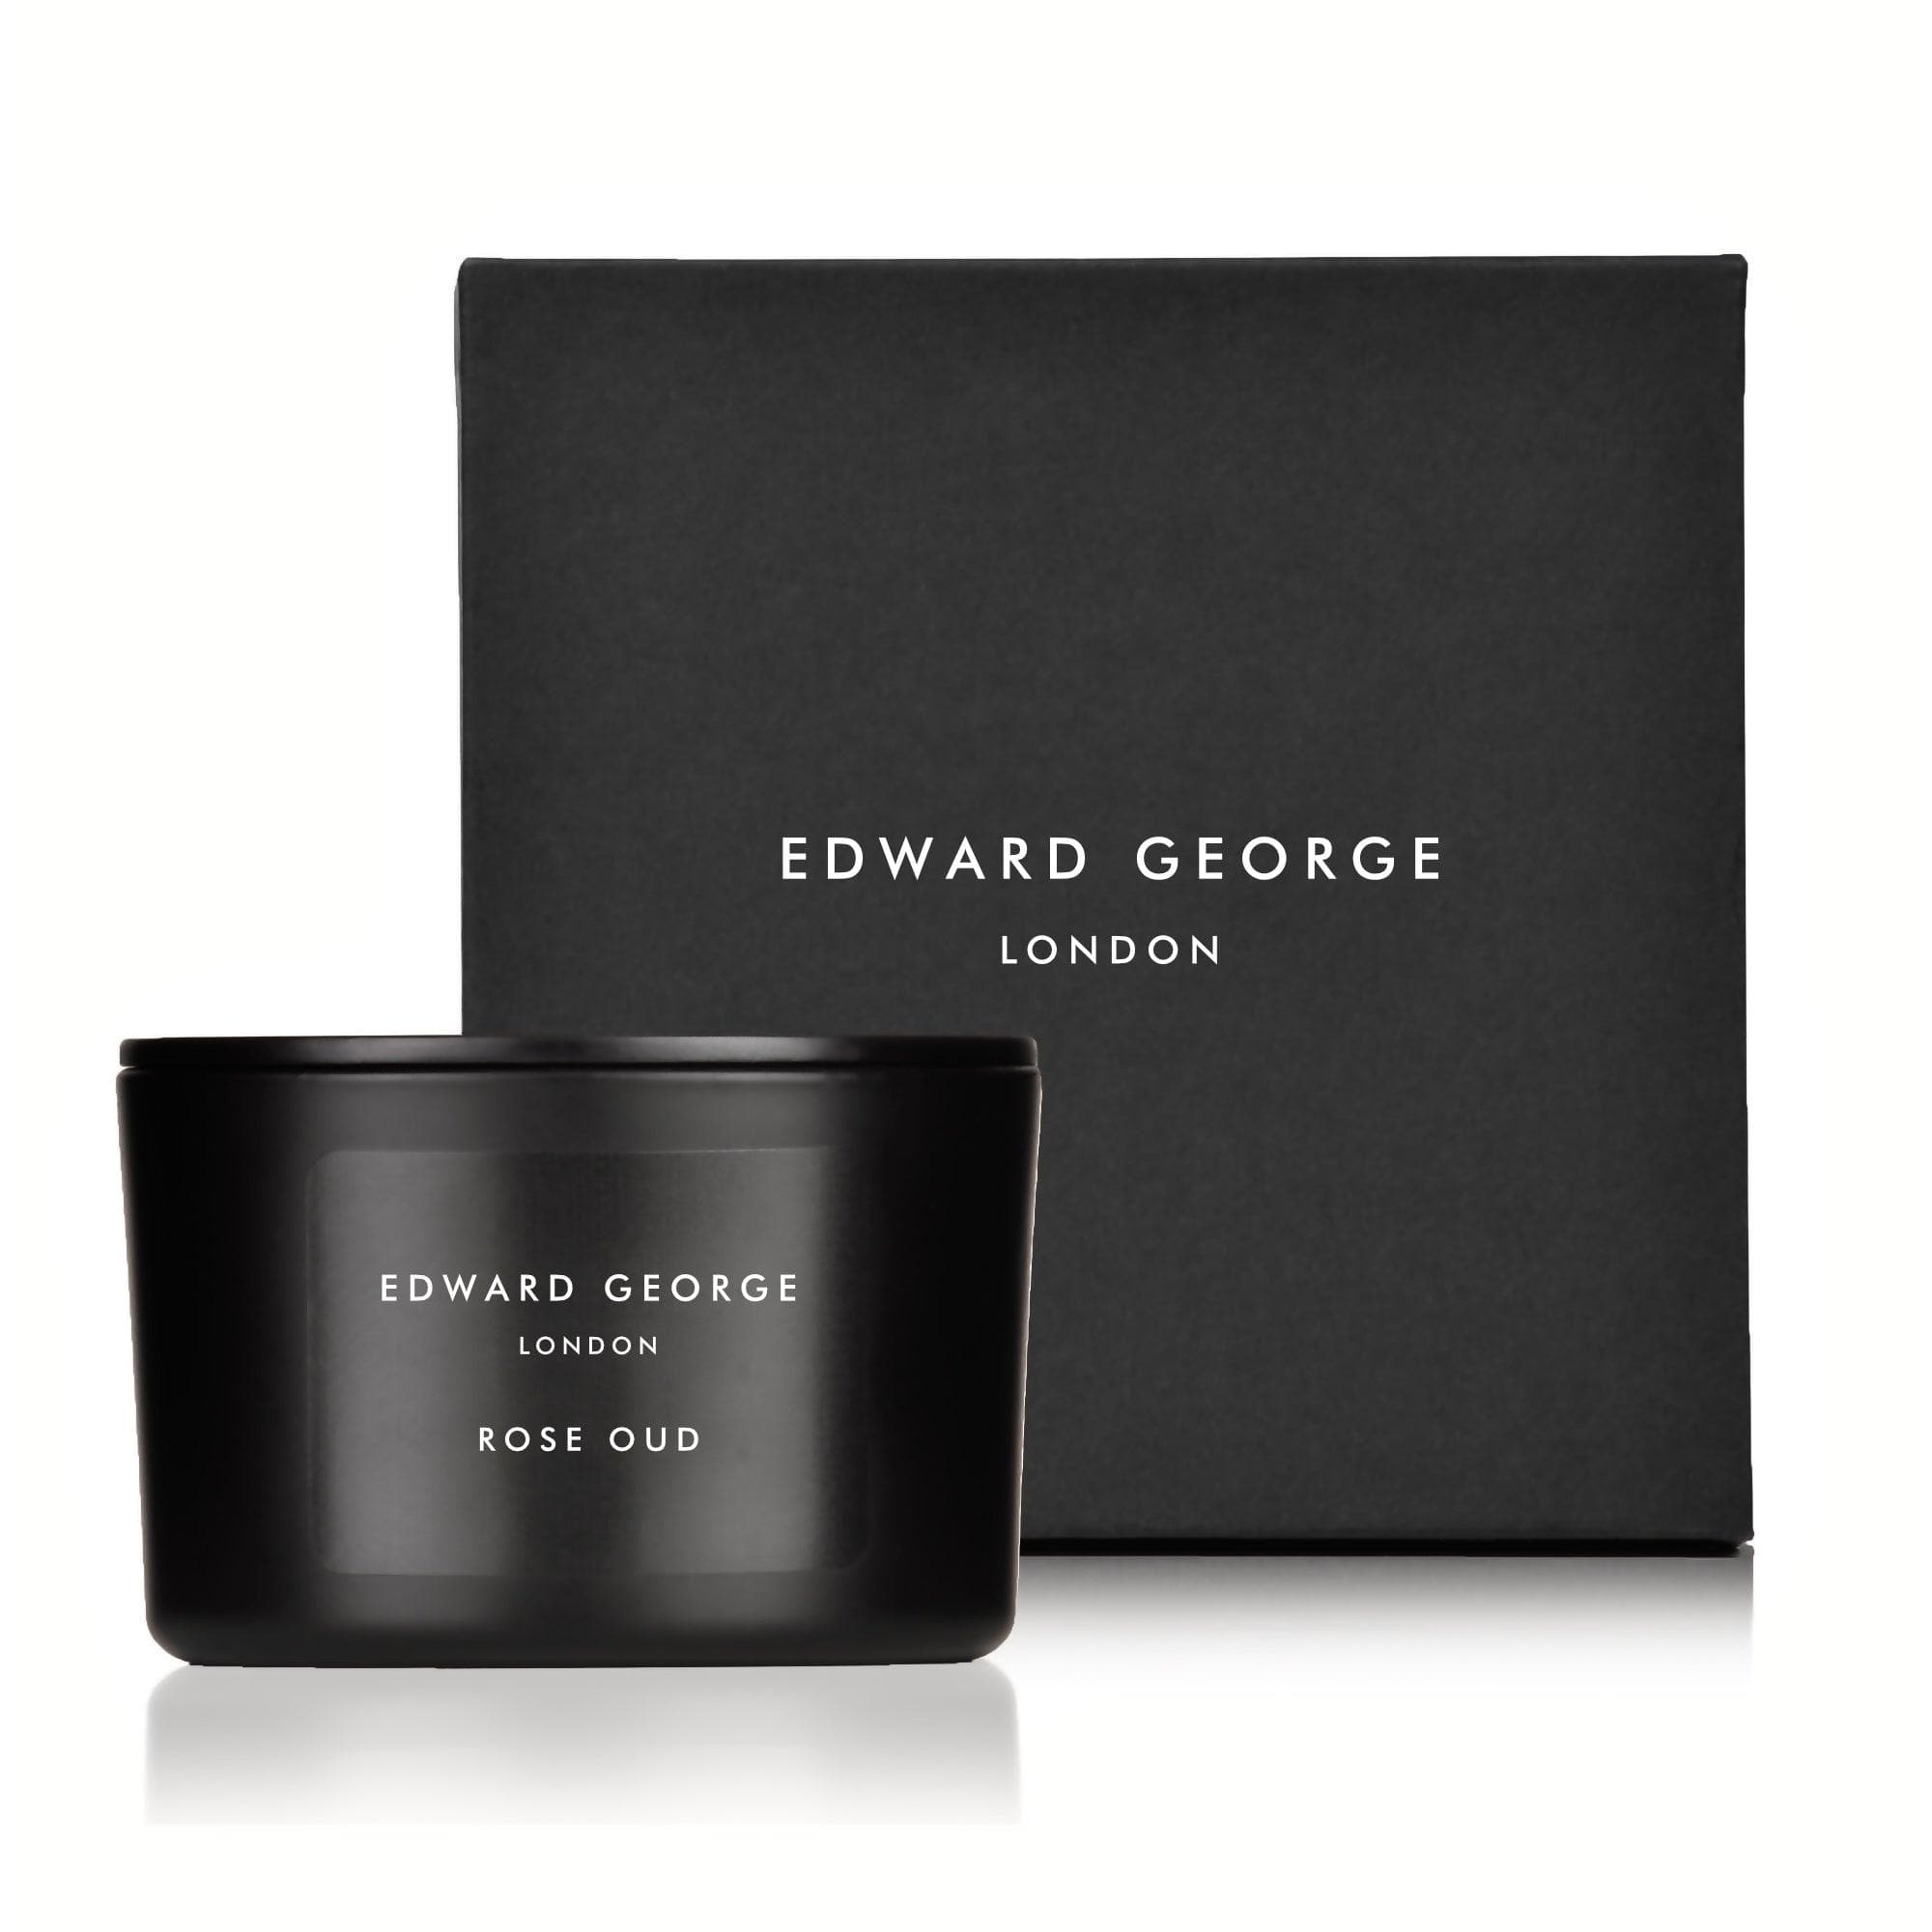 rose oud candles home fragrance decor room living room edward george london luxury gift ritual scent set lid zinc alloy black wax best black scented candle women men small